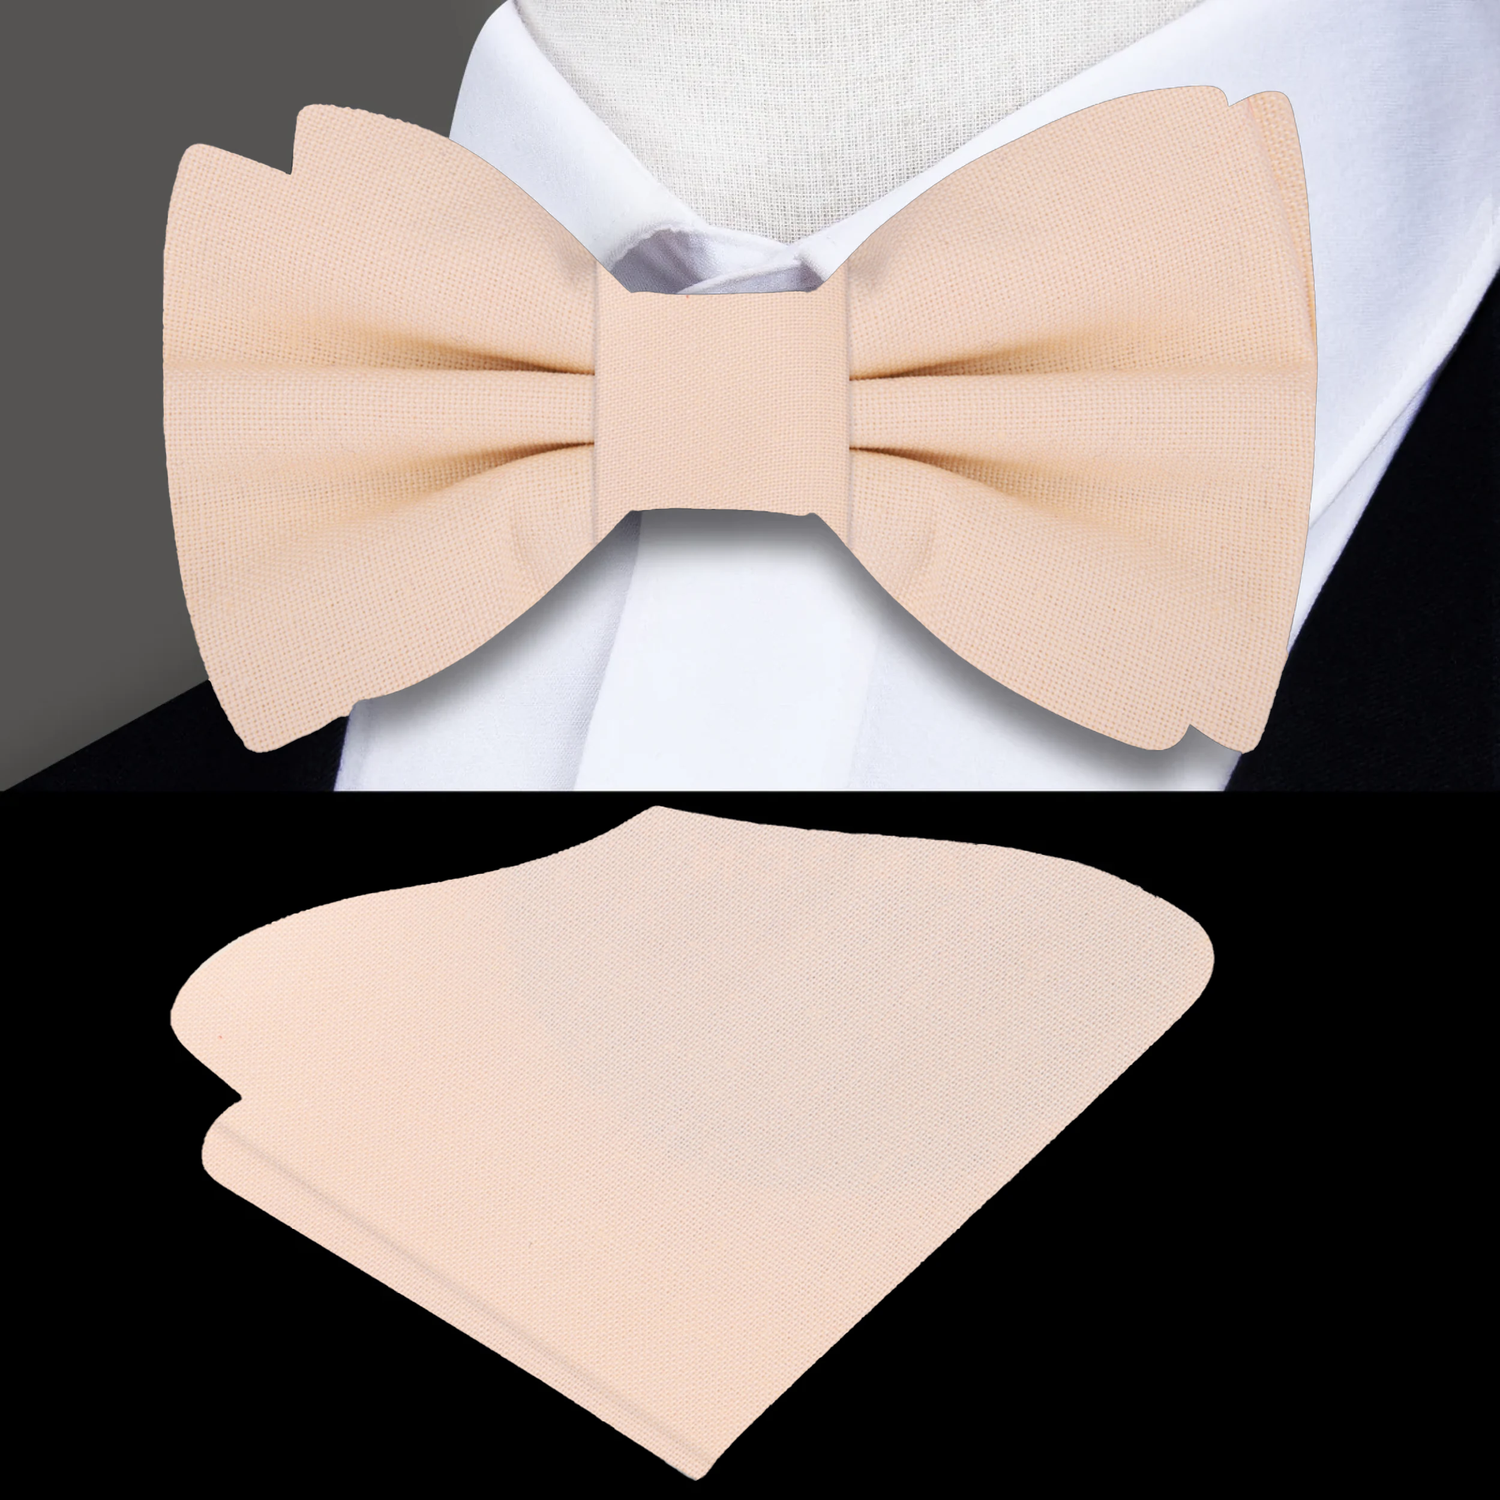  Beige Linen Bow Tie and Pocket Square||Beige